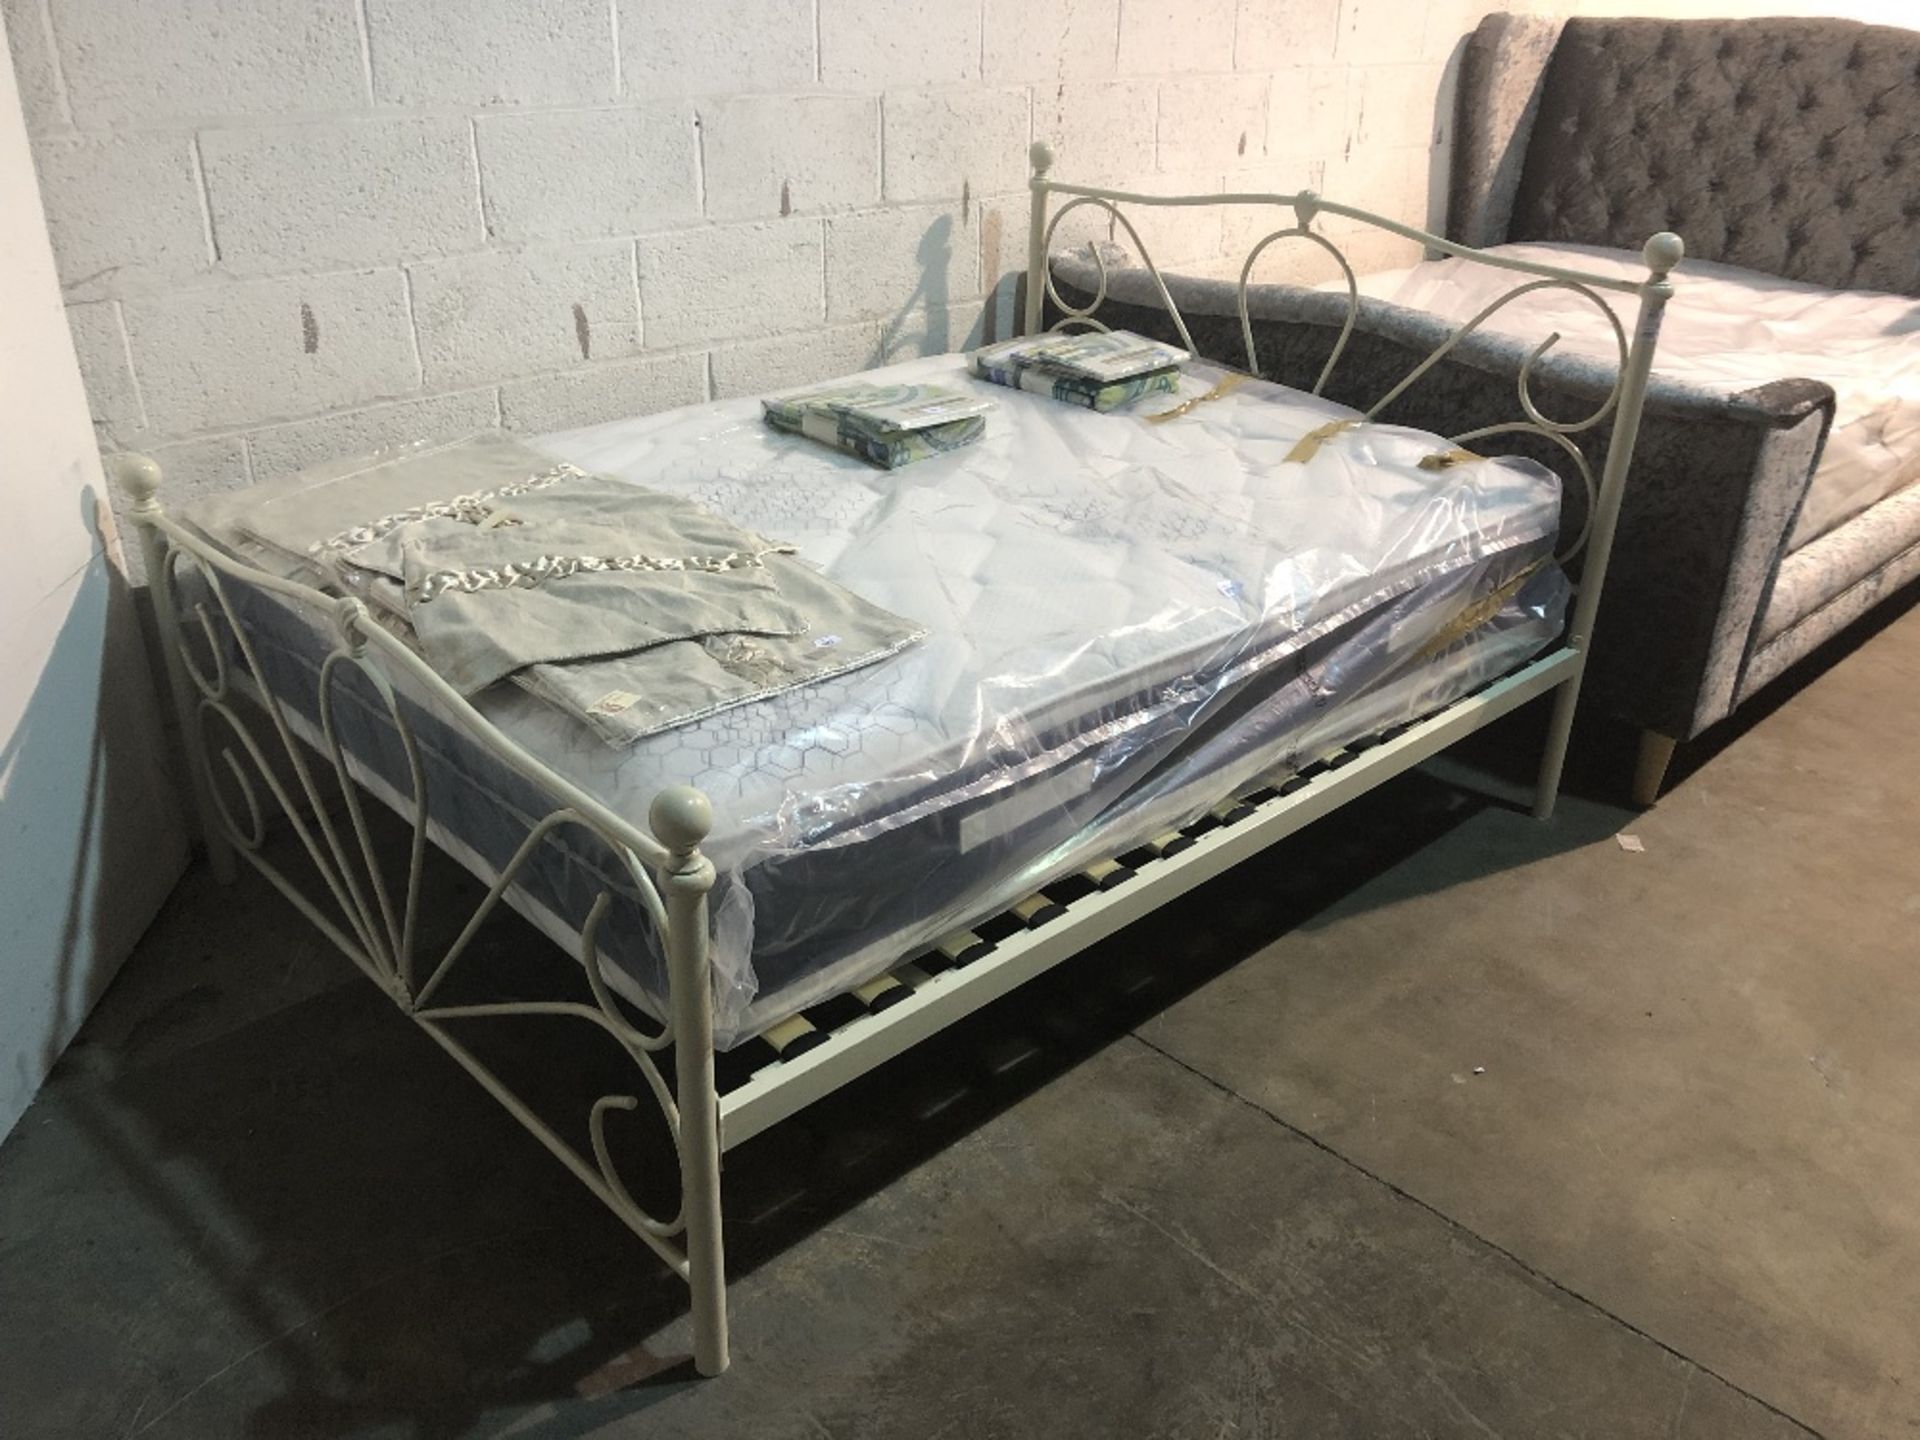 CLEON IVORY DOUBLE BED FRAME